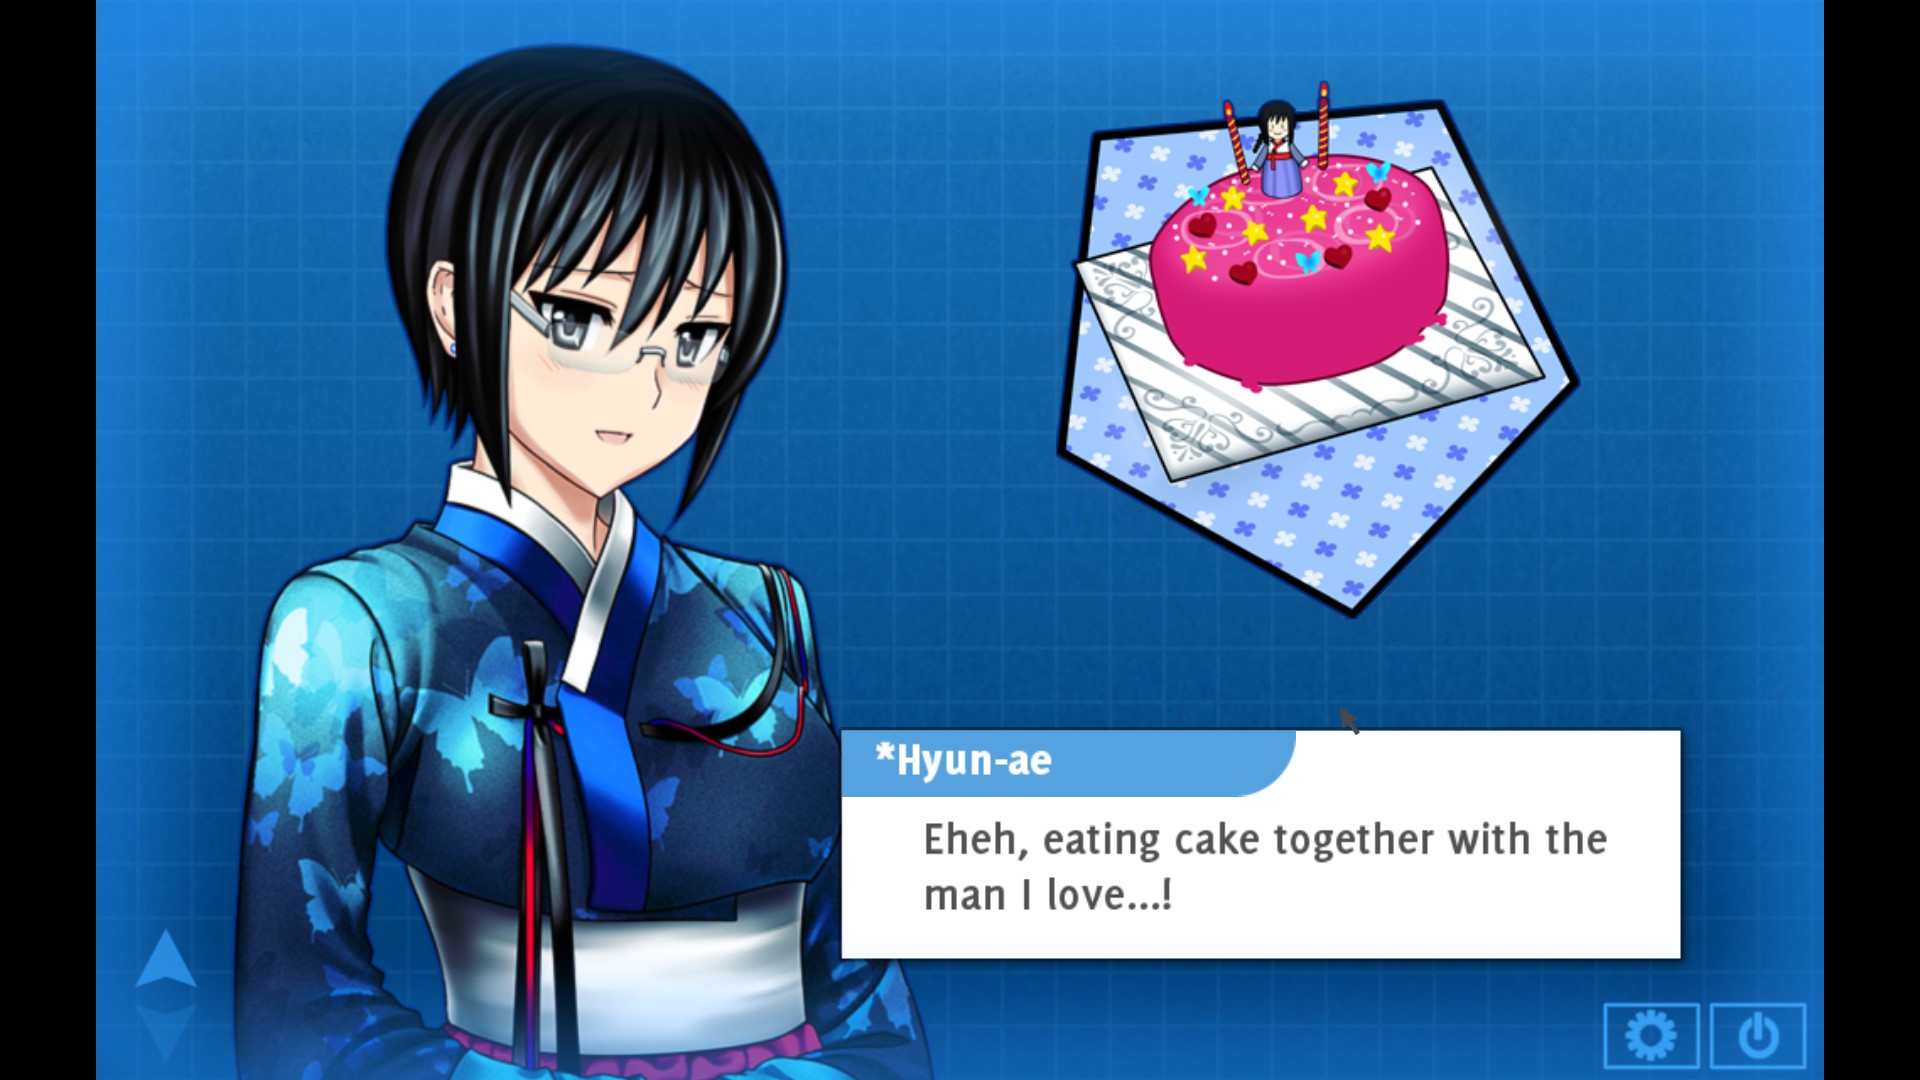 Video Game Asks Players To Bake Real Cakes For Virtual Girlfriends